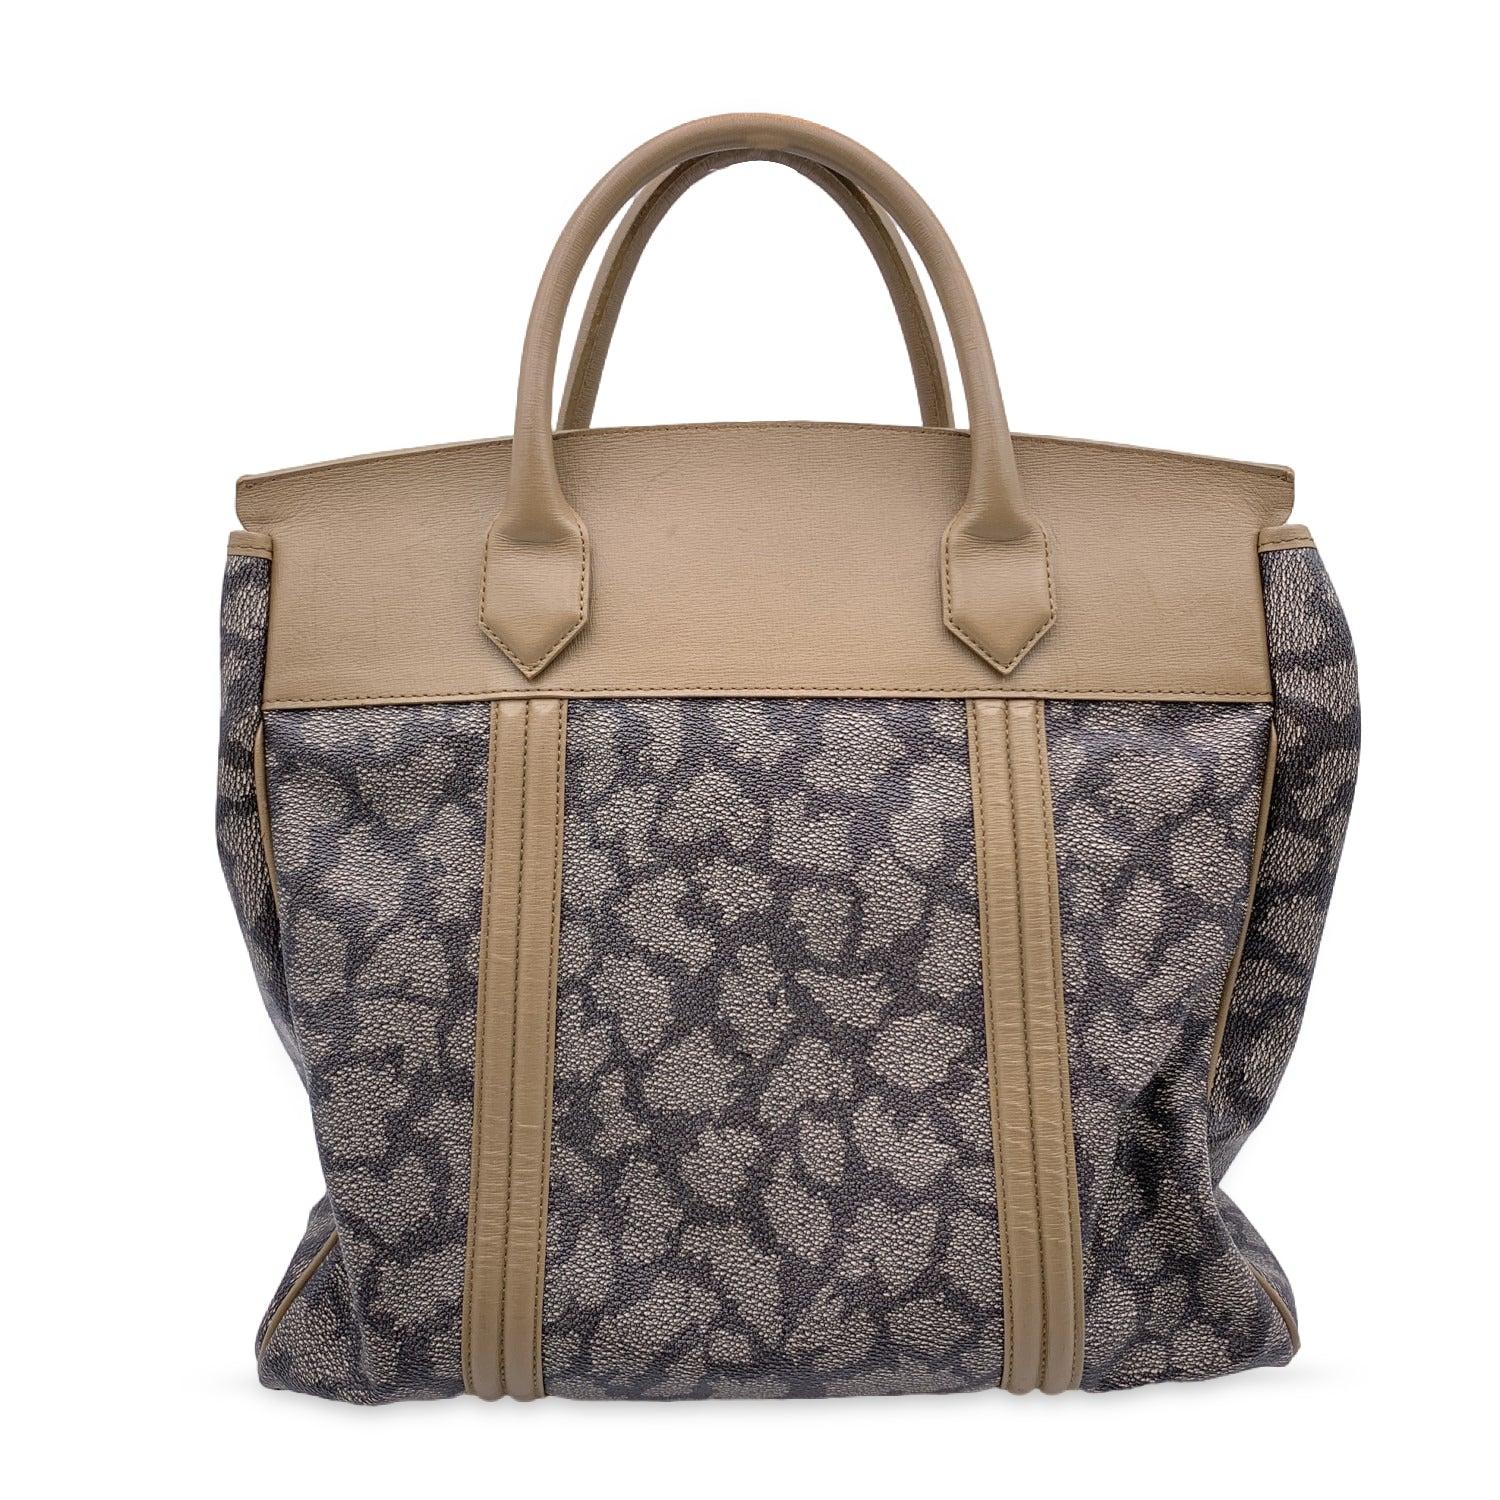 Yves Saint Laurent Vintage Giraffe Print Canvas Tote Bag Satchel In Good Condition For Sale In Rome, Rome